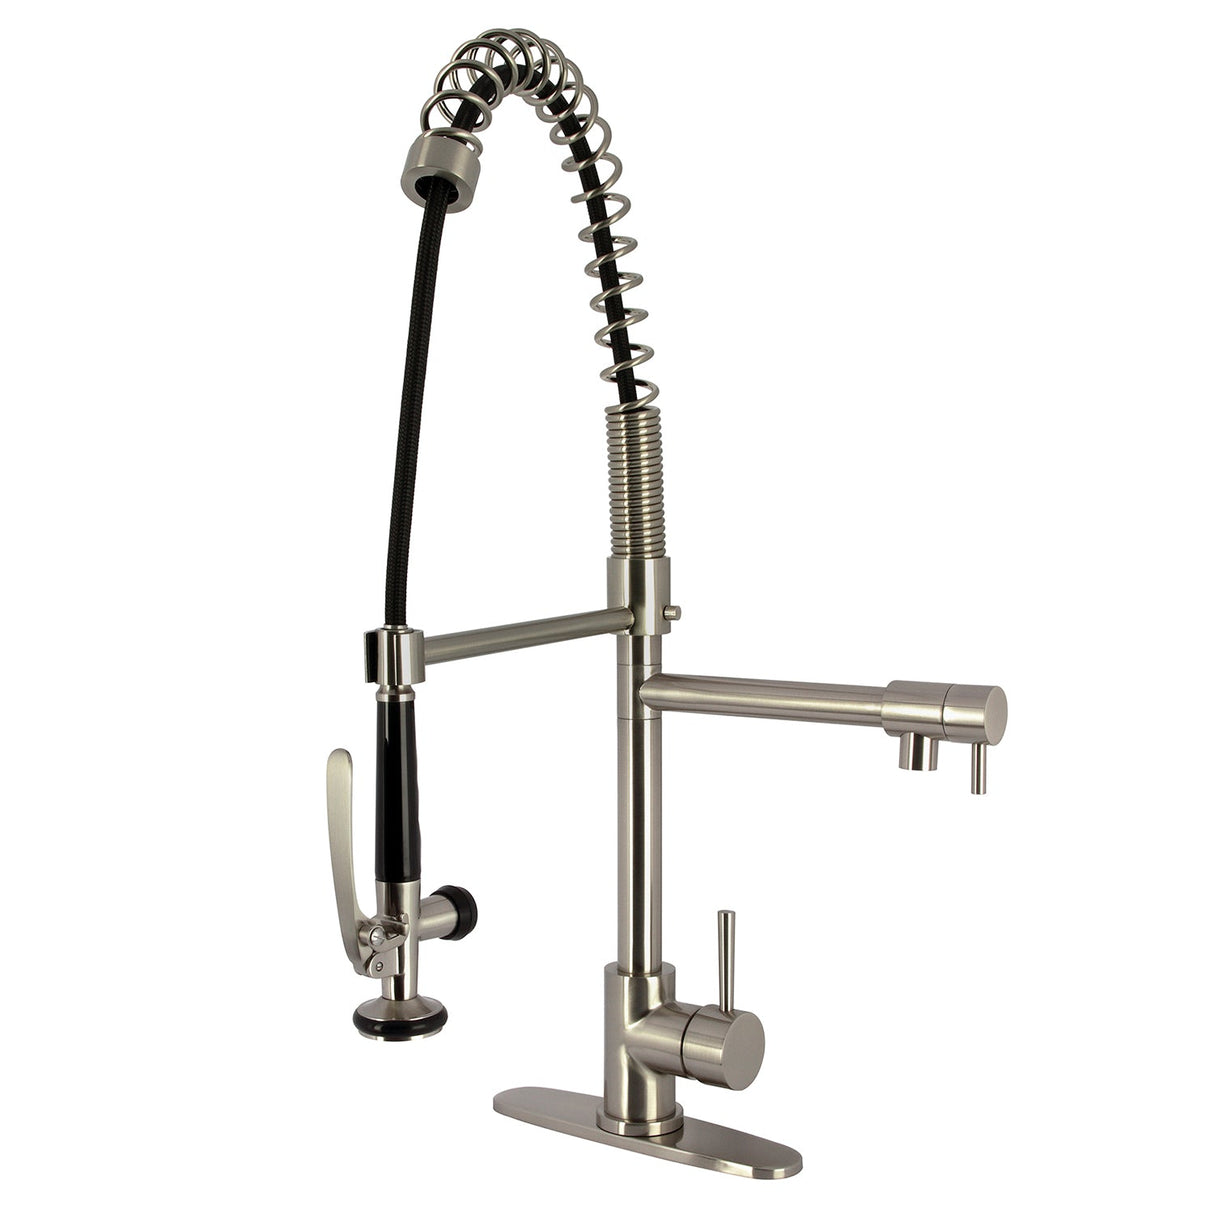 Concord LS8508DL Single-Handle 1-Hole Deck Mount Pre-Rinse Kitchen Faucet, Brushed Nickel